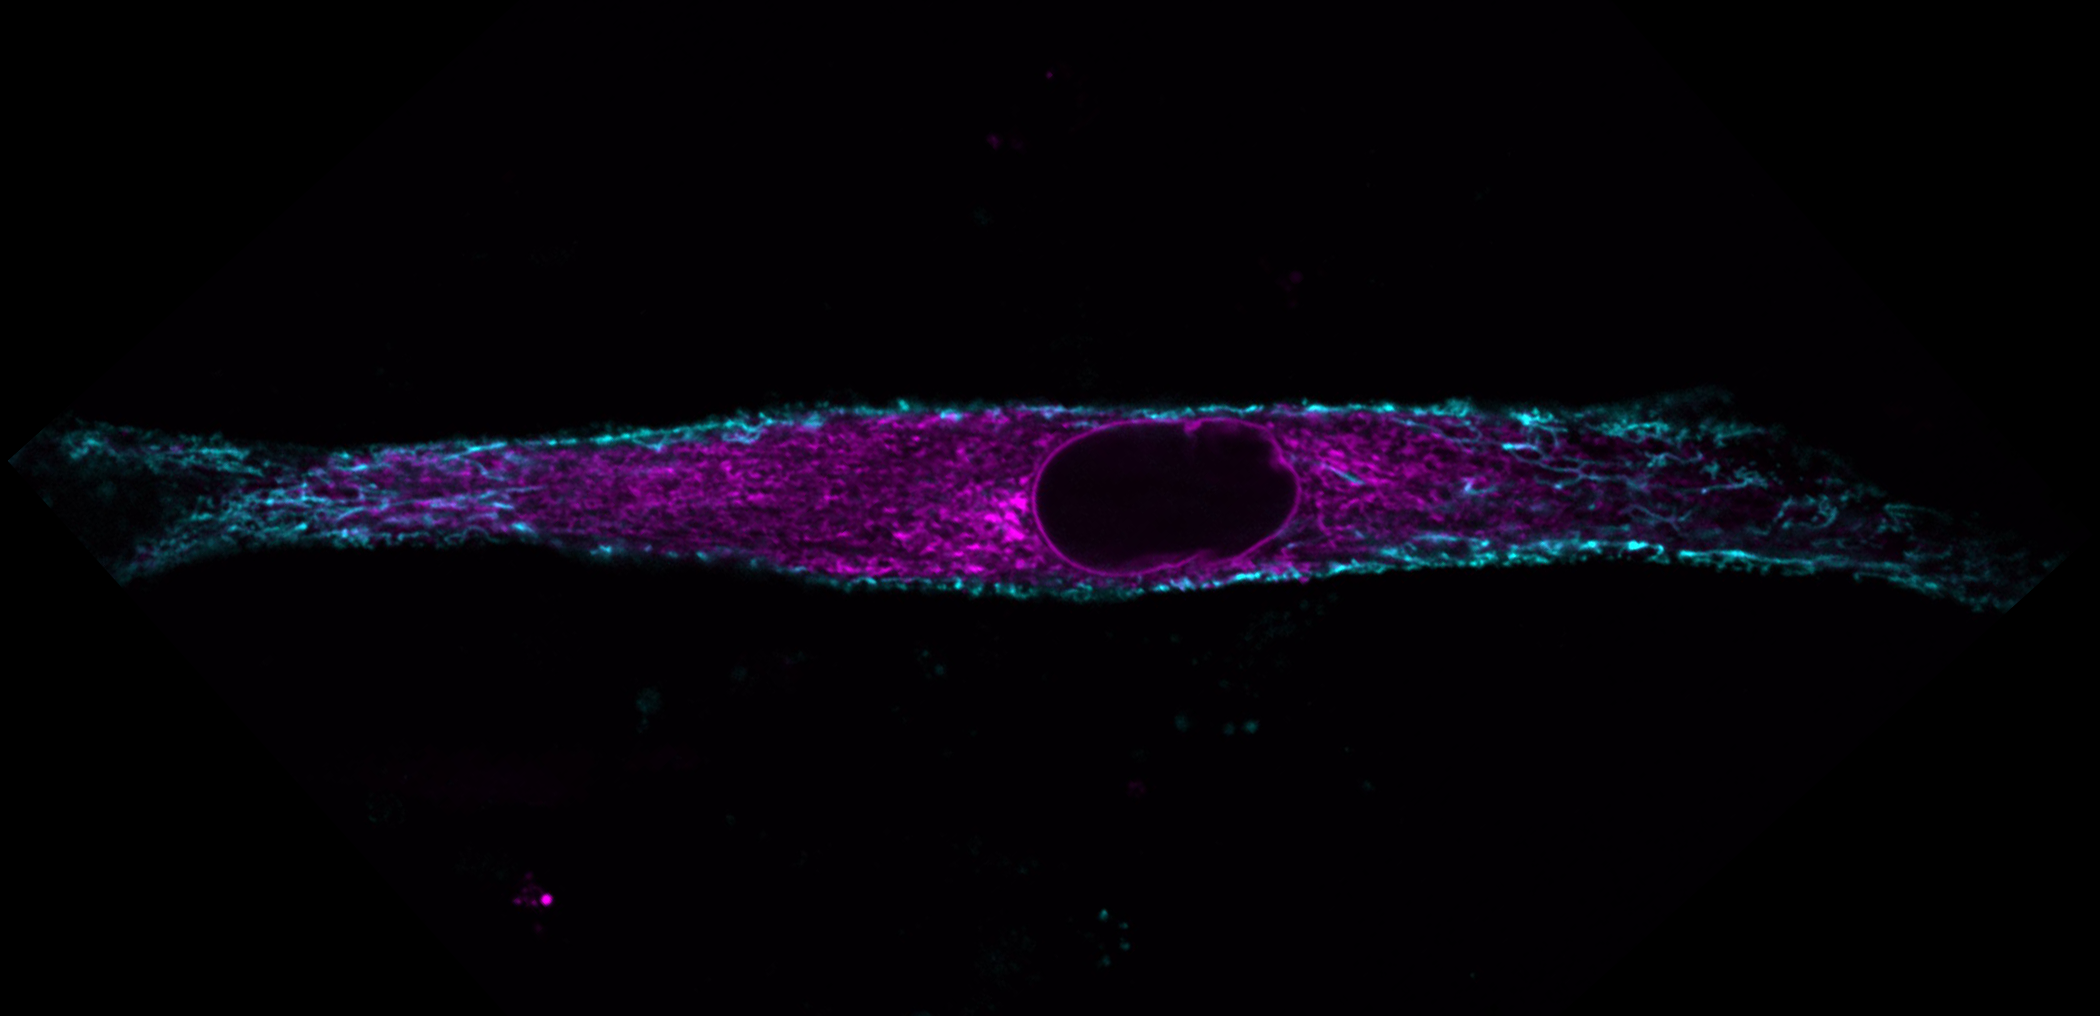 Myoblasts (muscle cells) from mice offer a window into the function of nuclear movement. Credit: Raquel Pereira (@Pereira_ARR)